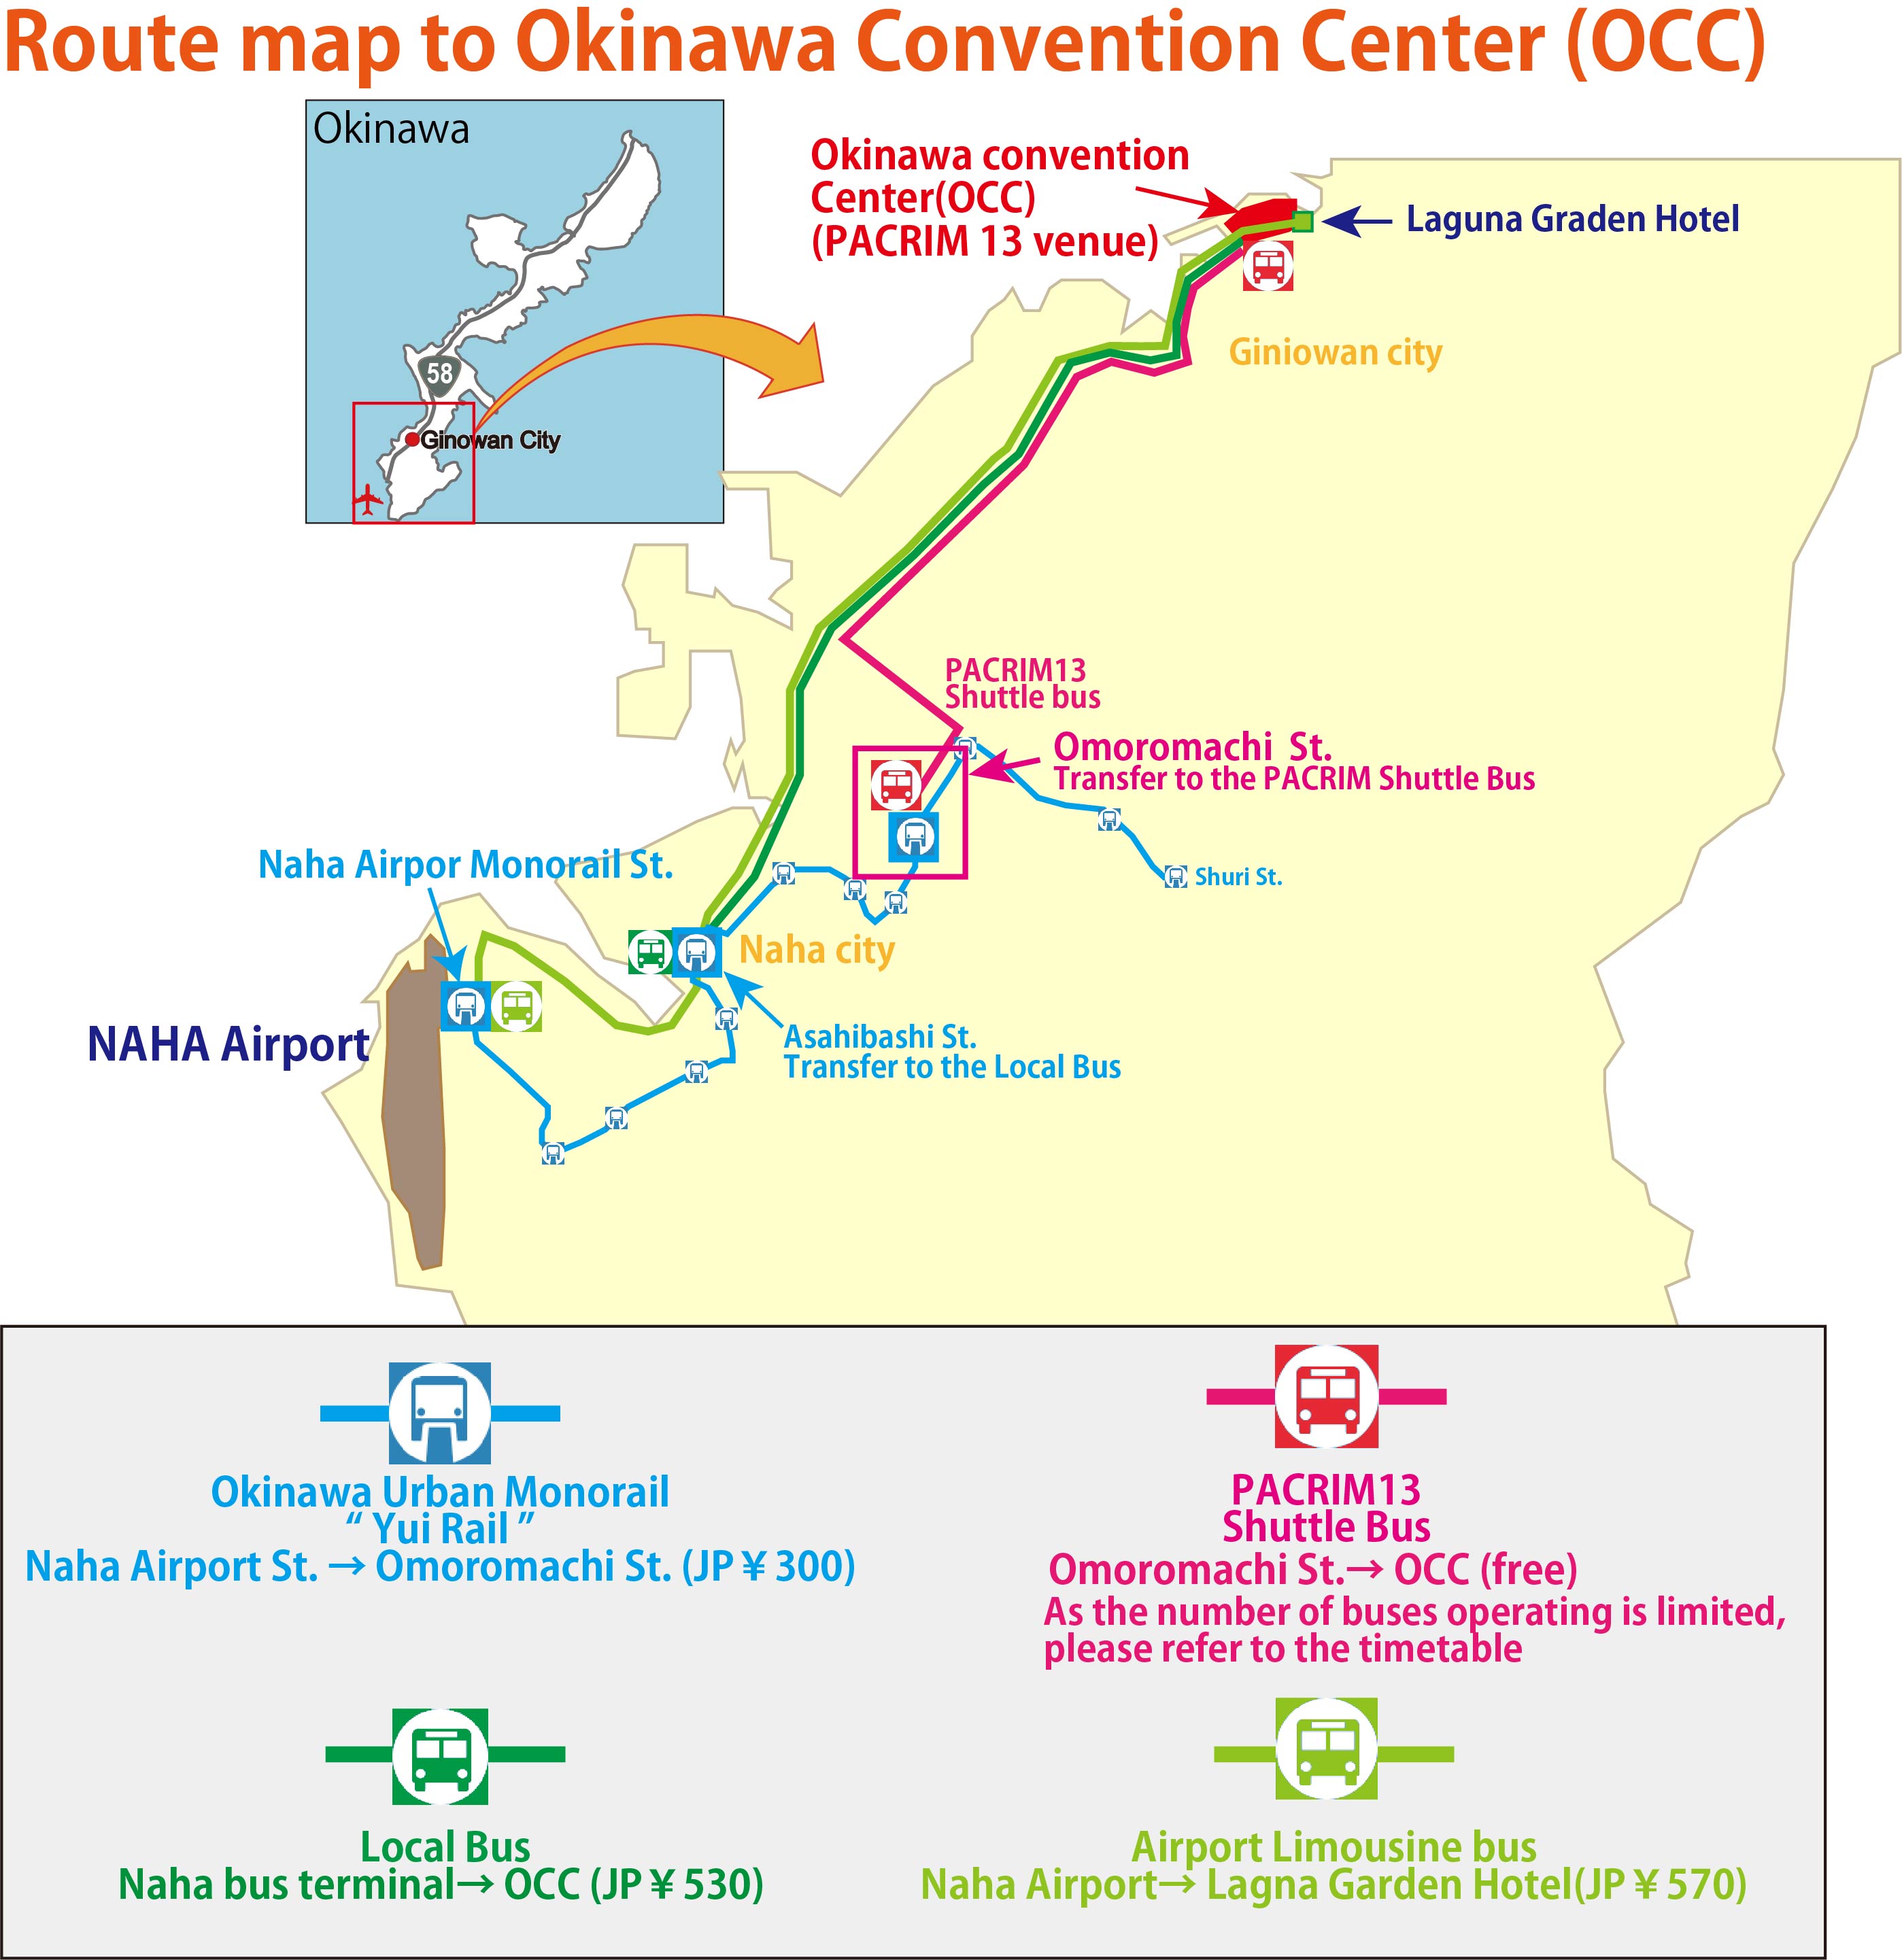 Route map to OCC